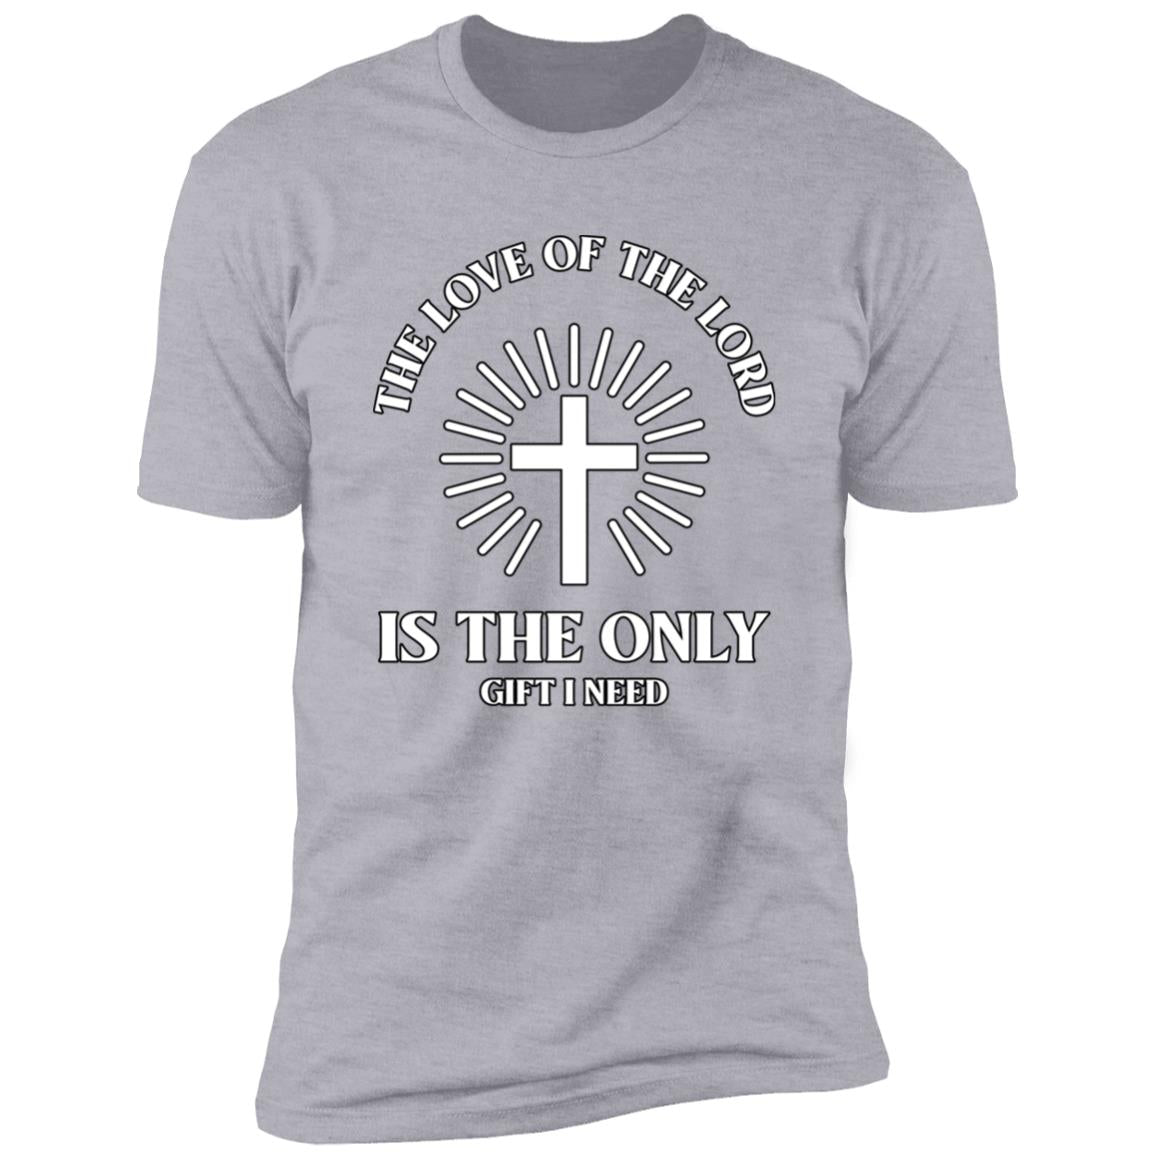 The Love of the Lord (Unisex Tee)